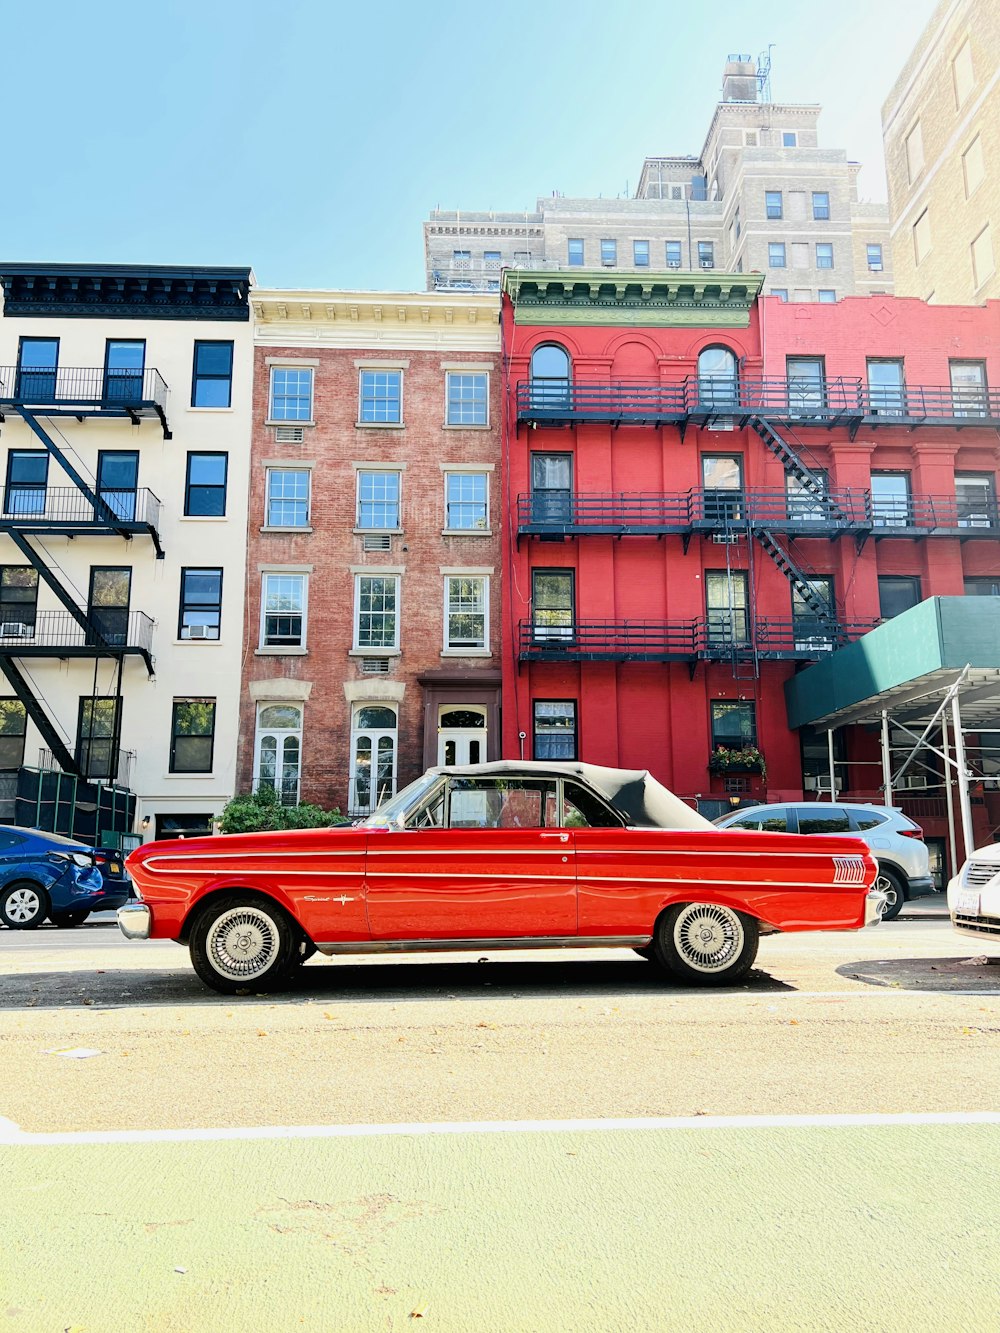 a red car parked in front of a row of buildings